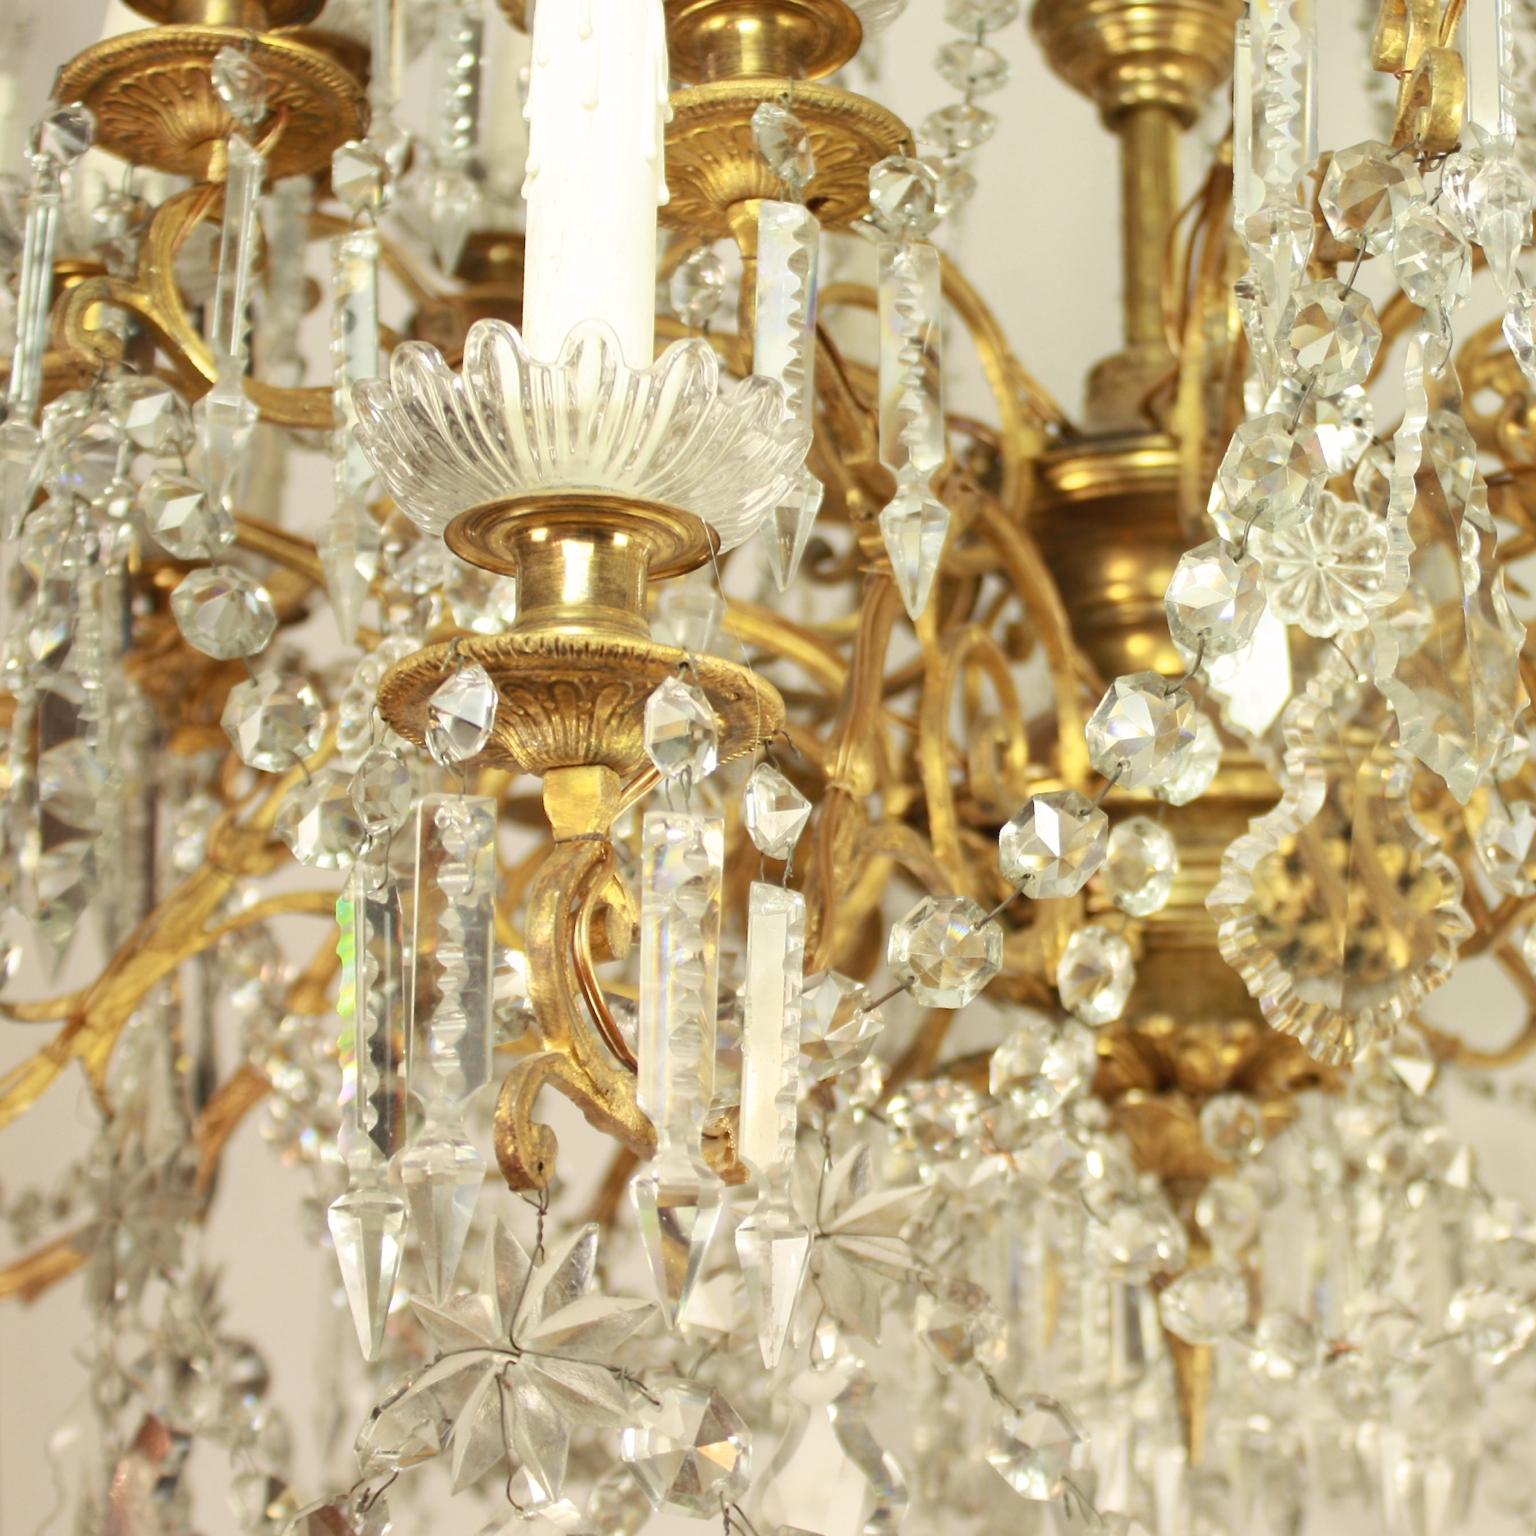 French Regency Style 36-Light Gilt-Bronze and Crystal-Cut Chandelier, circa 1860